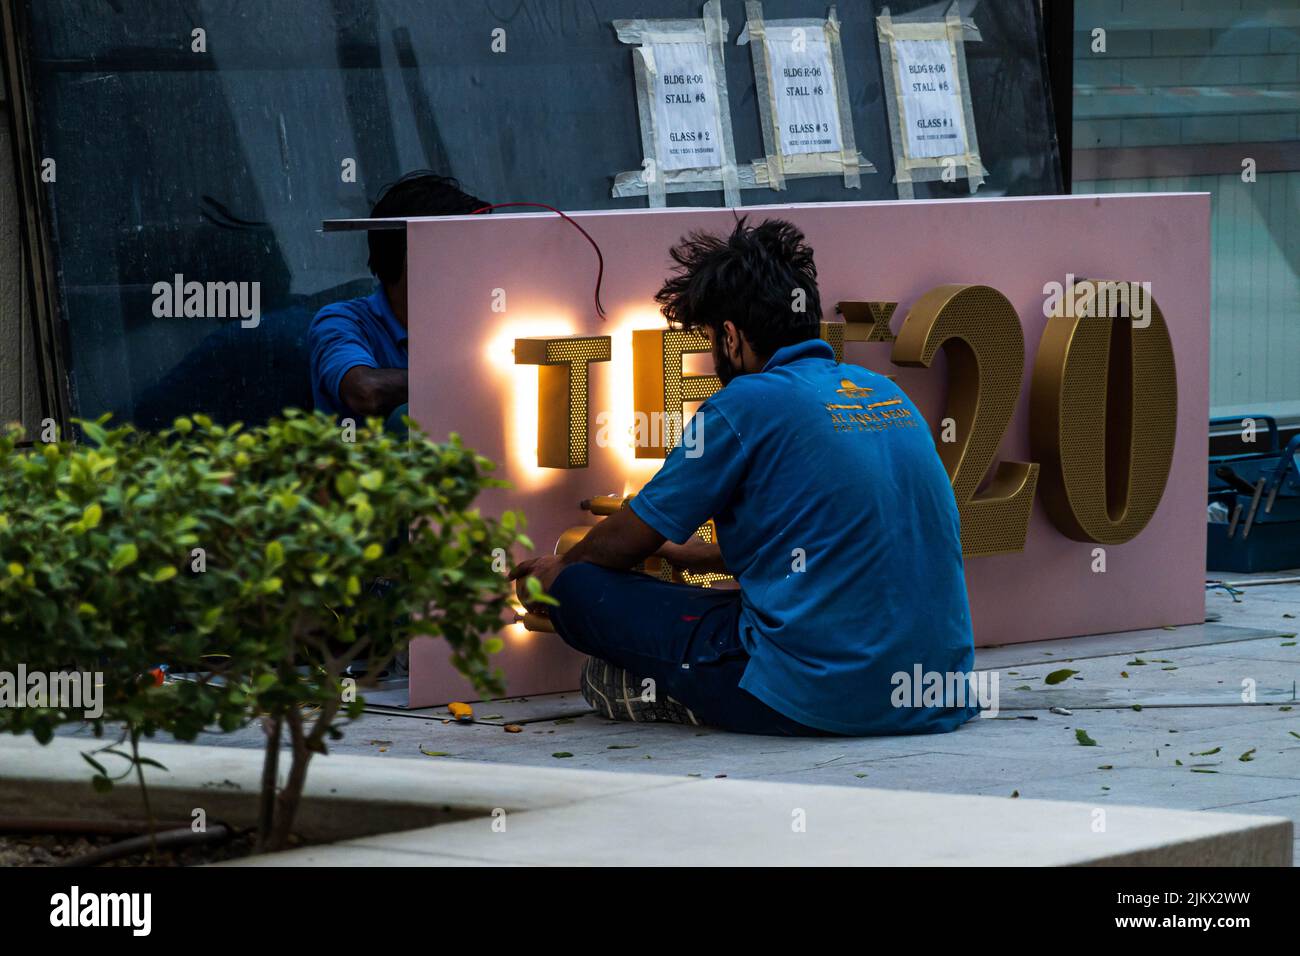 A man sitting alone on a street in Msheireb Downtown Doha, Qatar Stock Photo